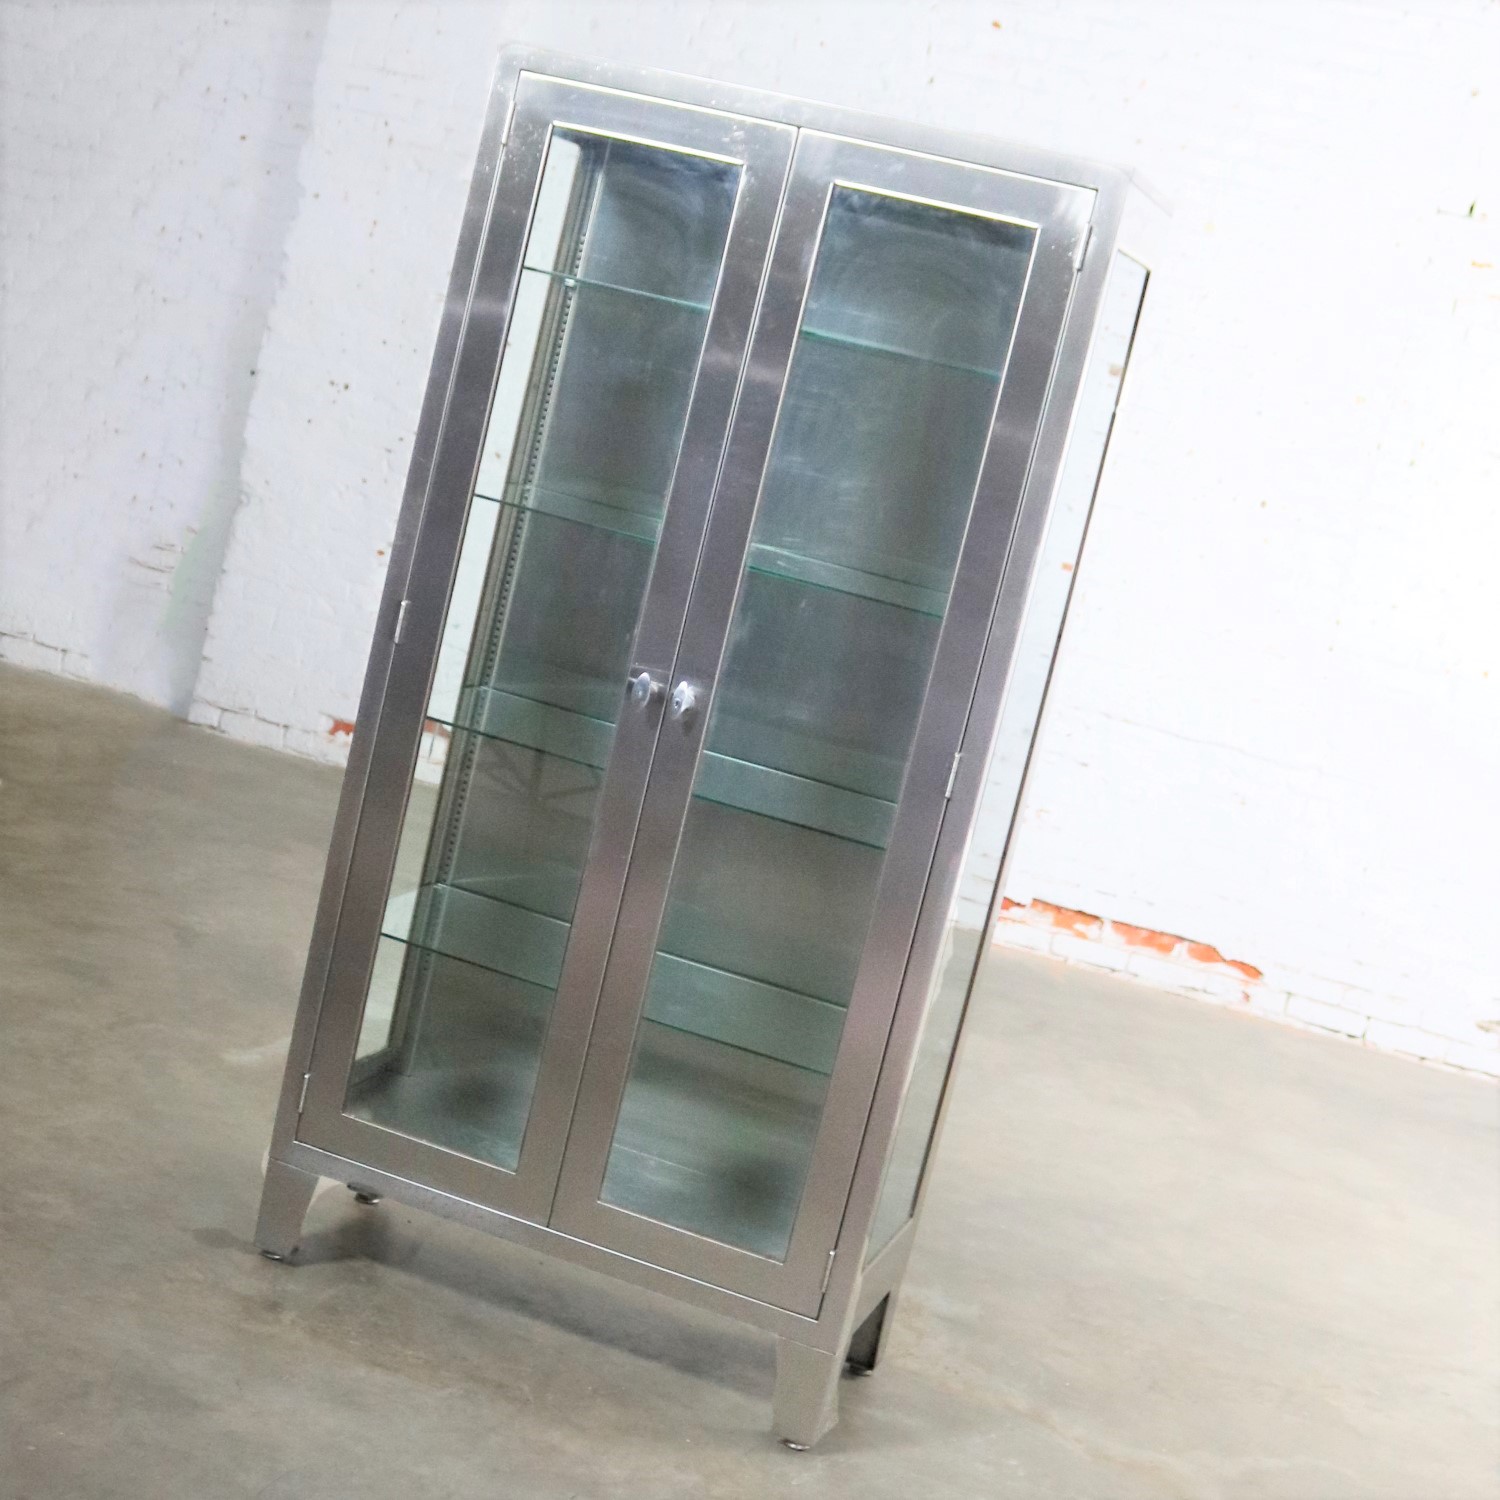 Vintage Stainless Steel Industrial Display Apothecary Medical Cabinet with Glass Doors and Shelves-3